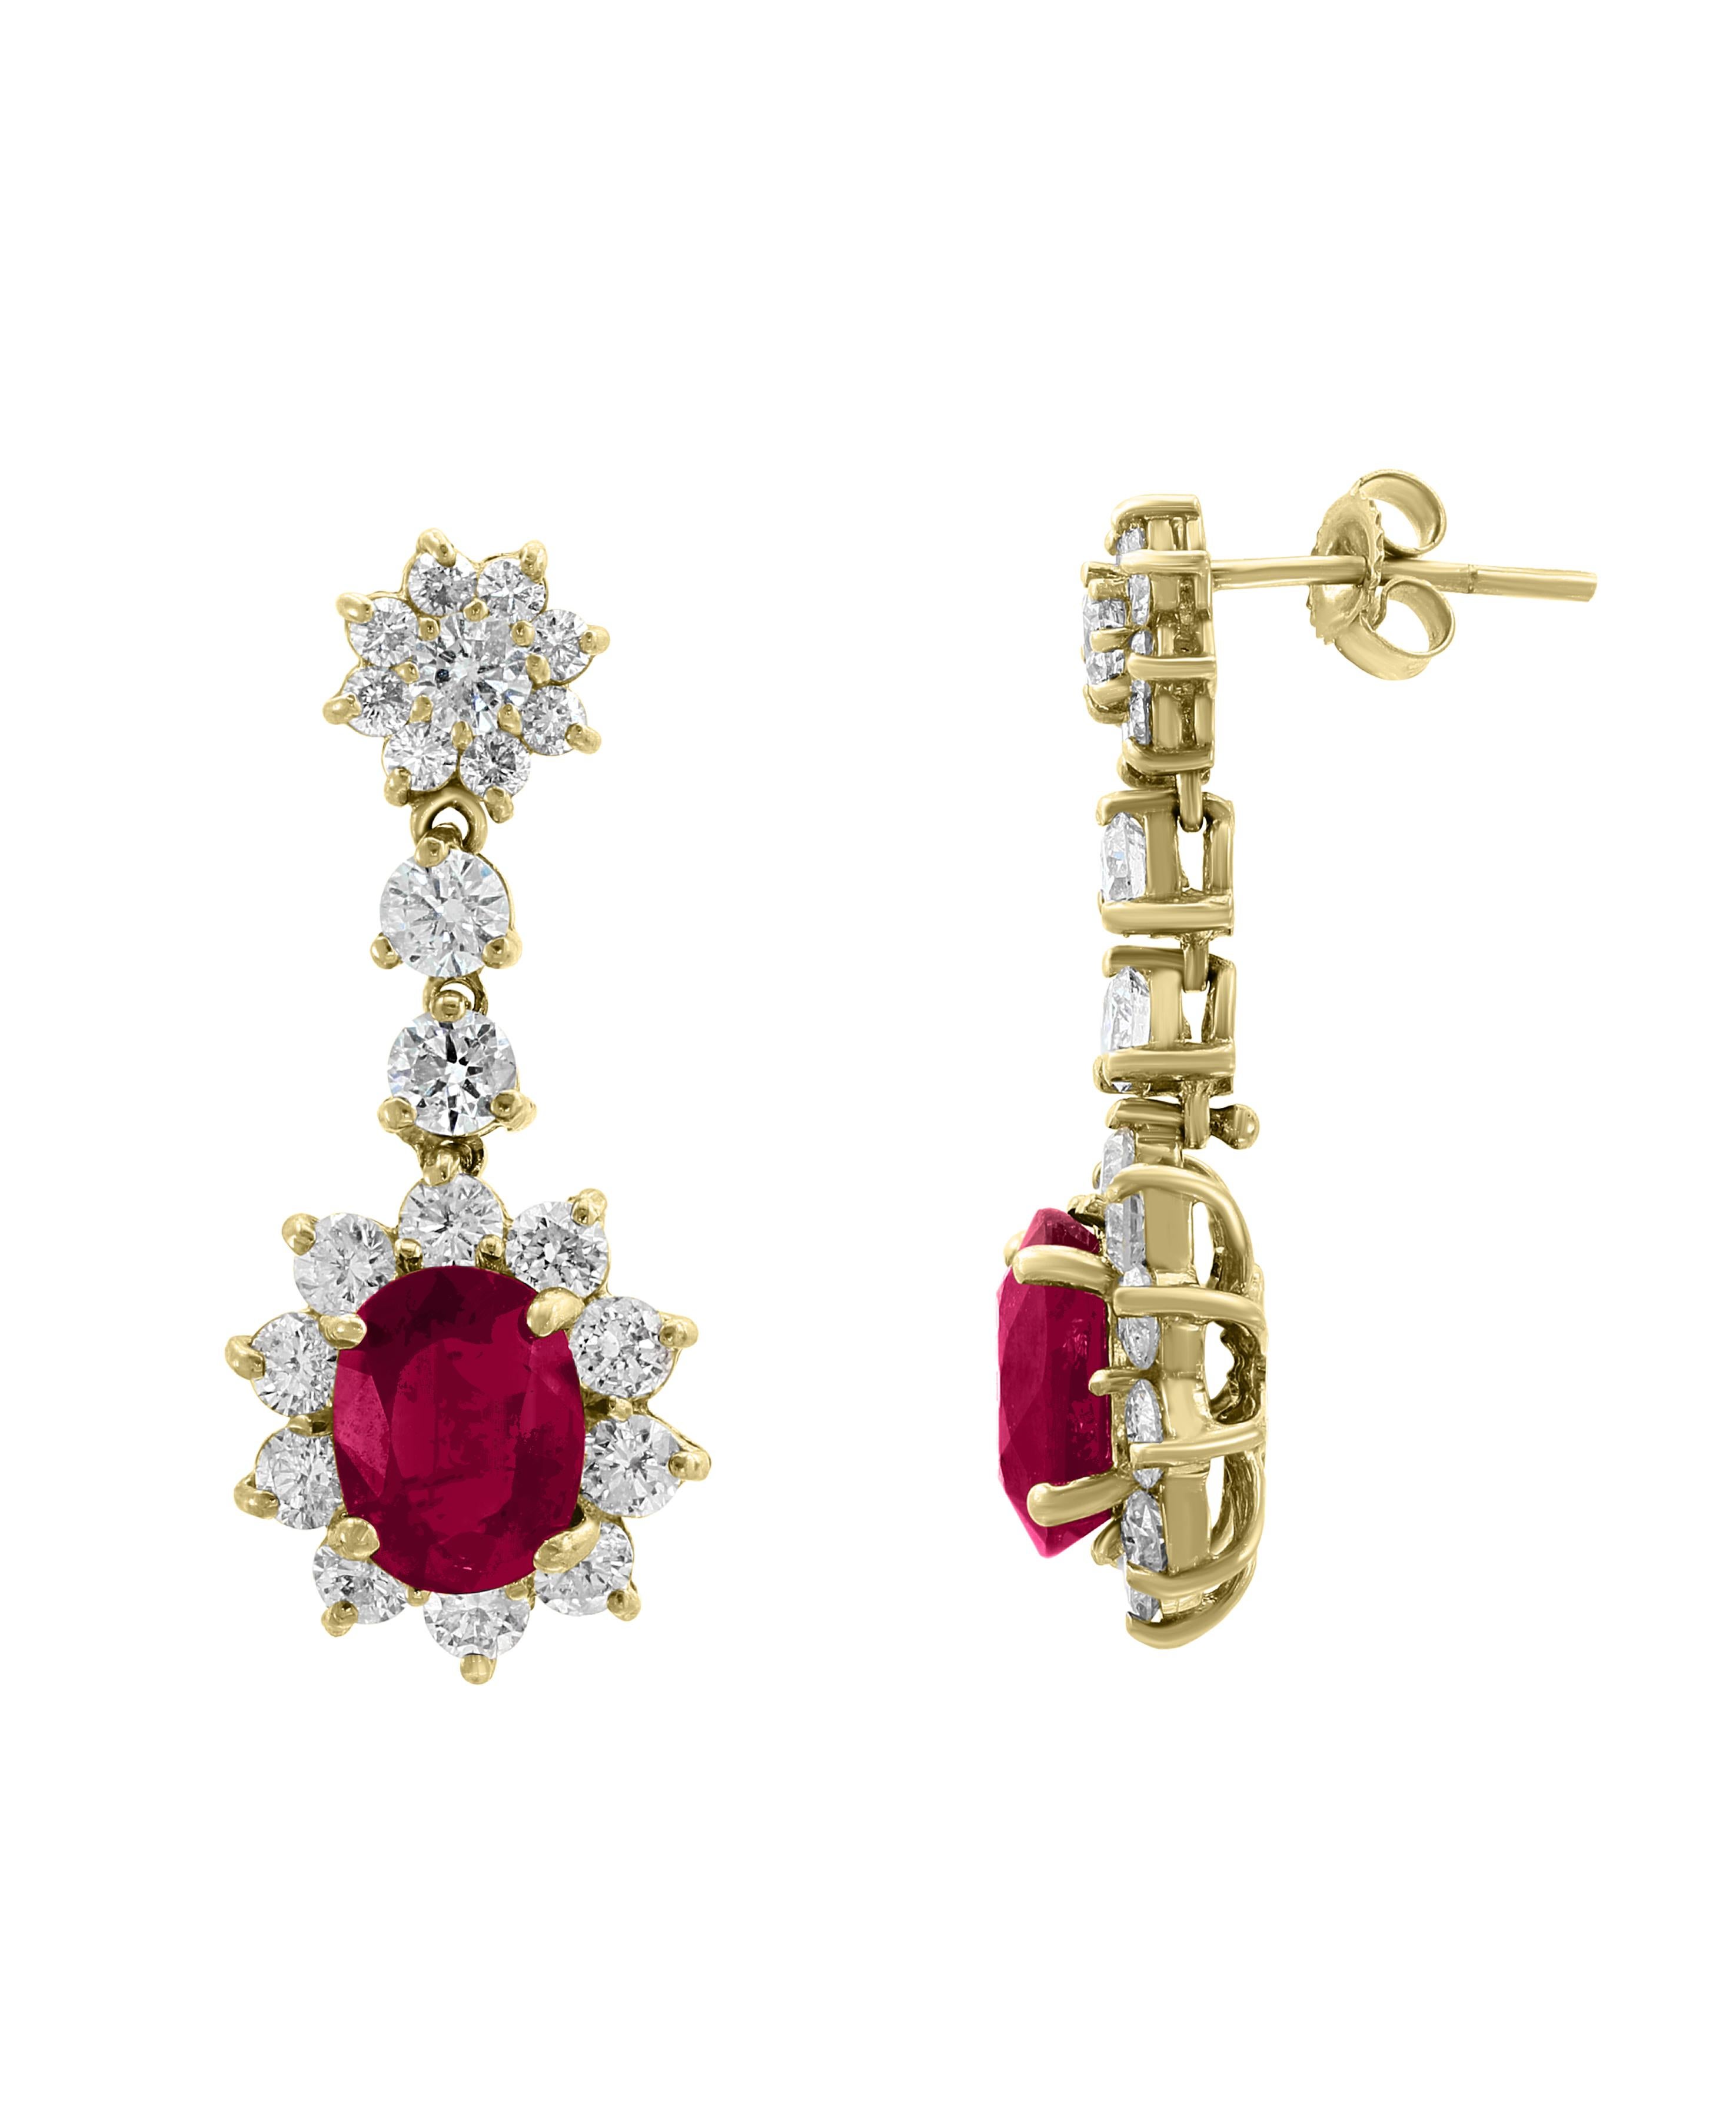 5.5 Carats  of two  Ruby   and  5 Ct Diamond  Hanging Earrings 18 K Yellow Gold
This exquisite pair of earrings are beautifully crafted with 18 karat Yellow gold  weighing    
 8.0  grams
 Ruby : 5.5 Ct
Ruby is treated.
Diamonds : approximately 5.0